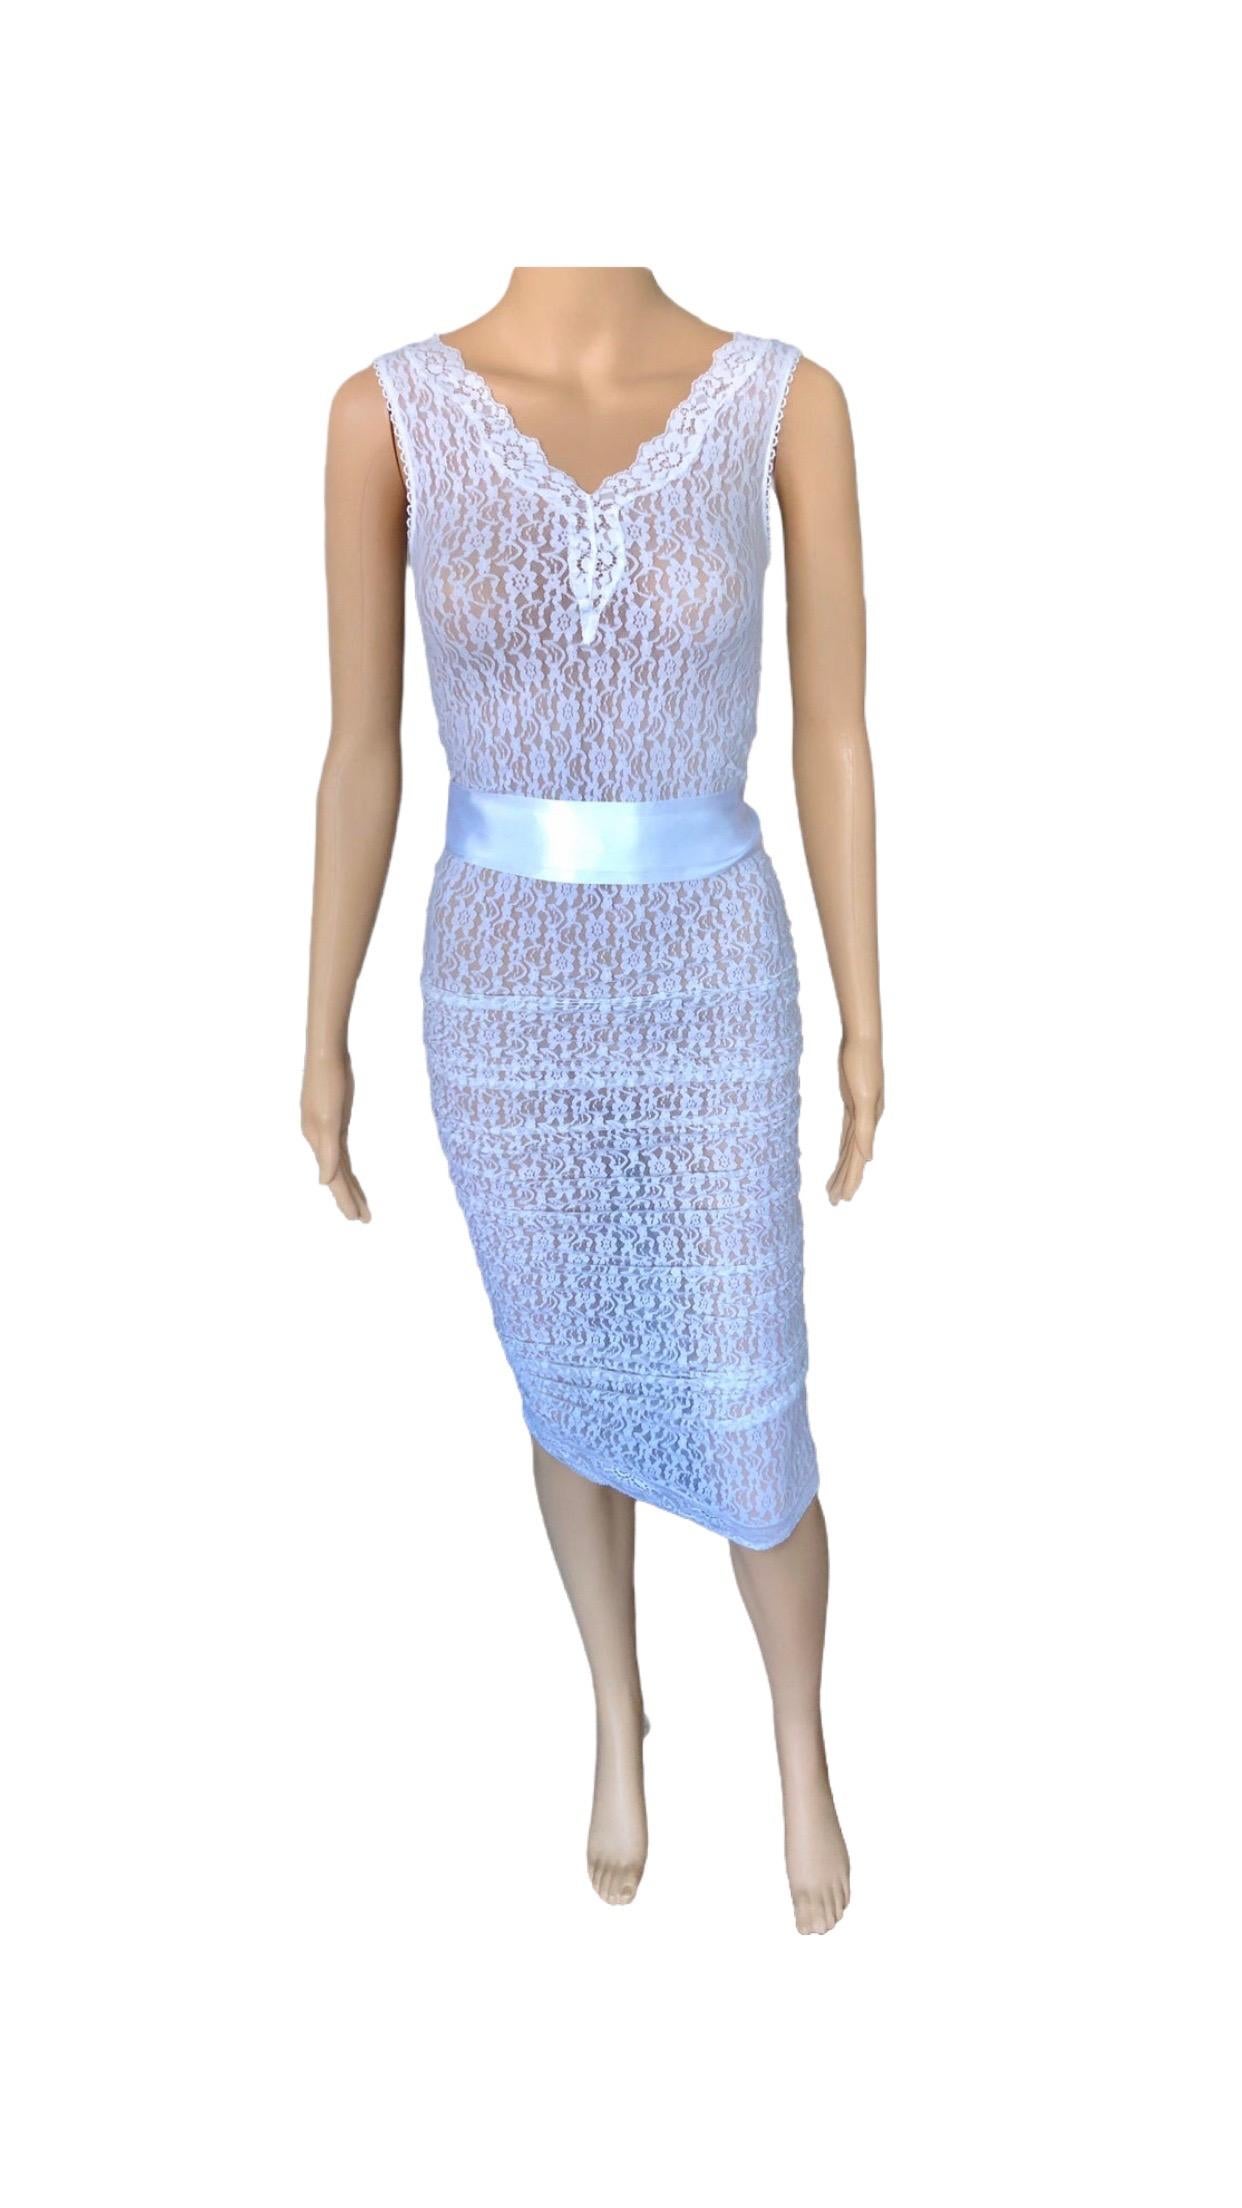 NWT D&G by Dolce & Gabbana S/S 2006 Runway Sheer Lace White Dress In New Condition For Sale In Naples, FL